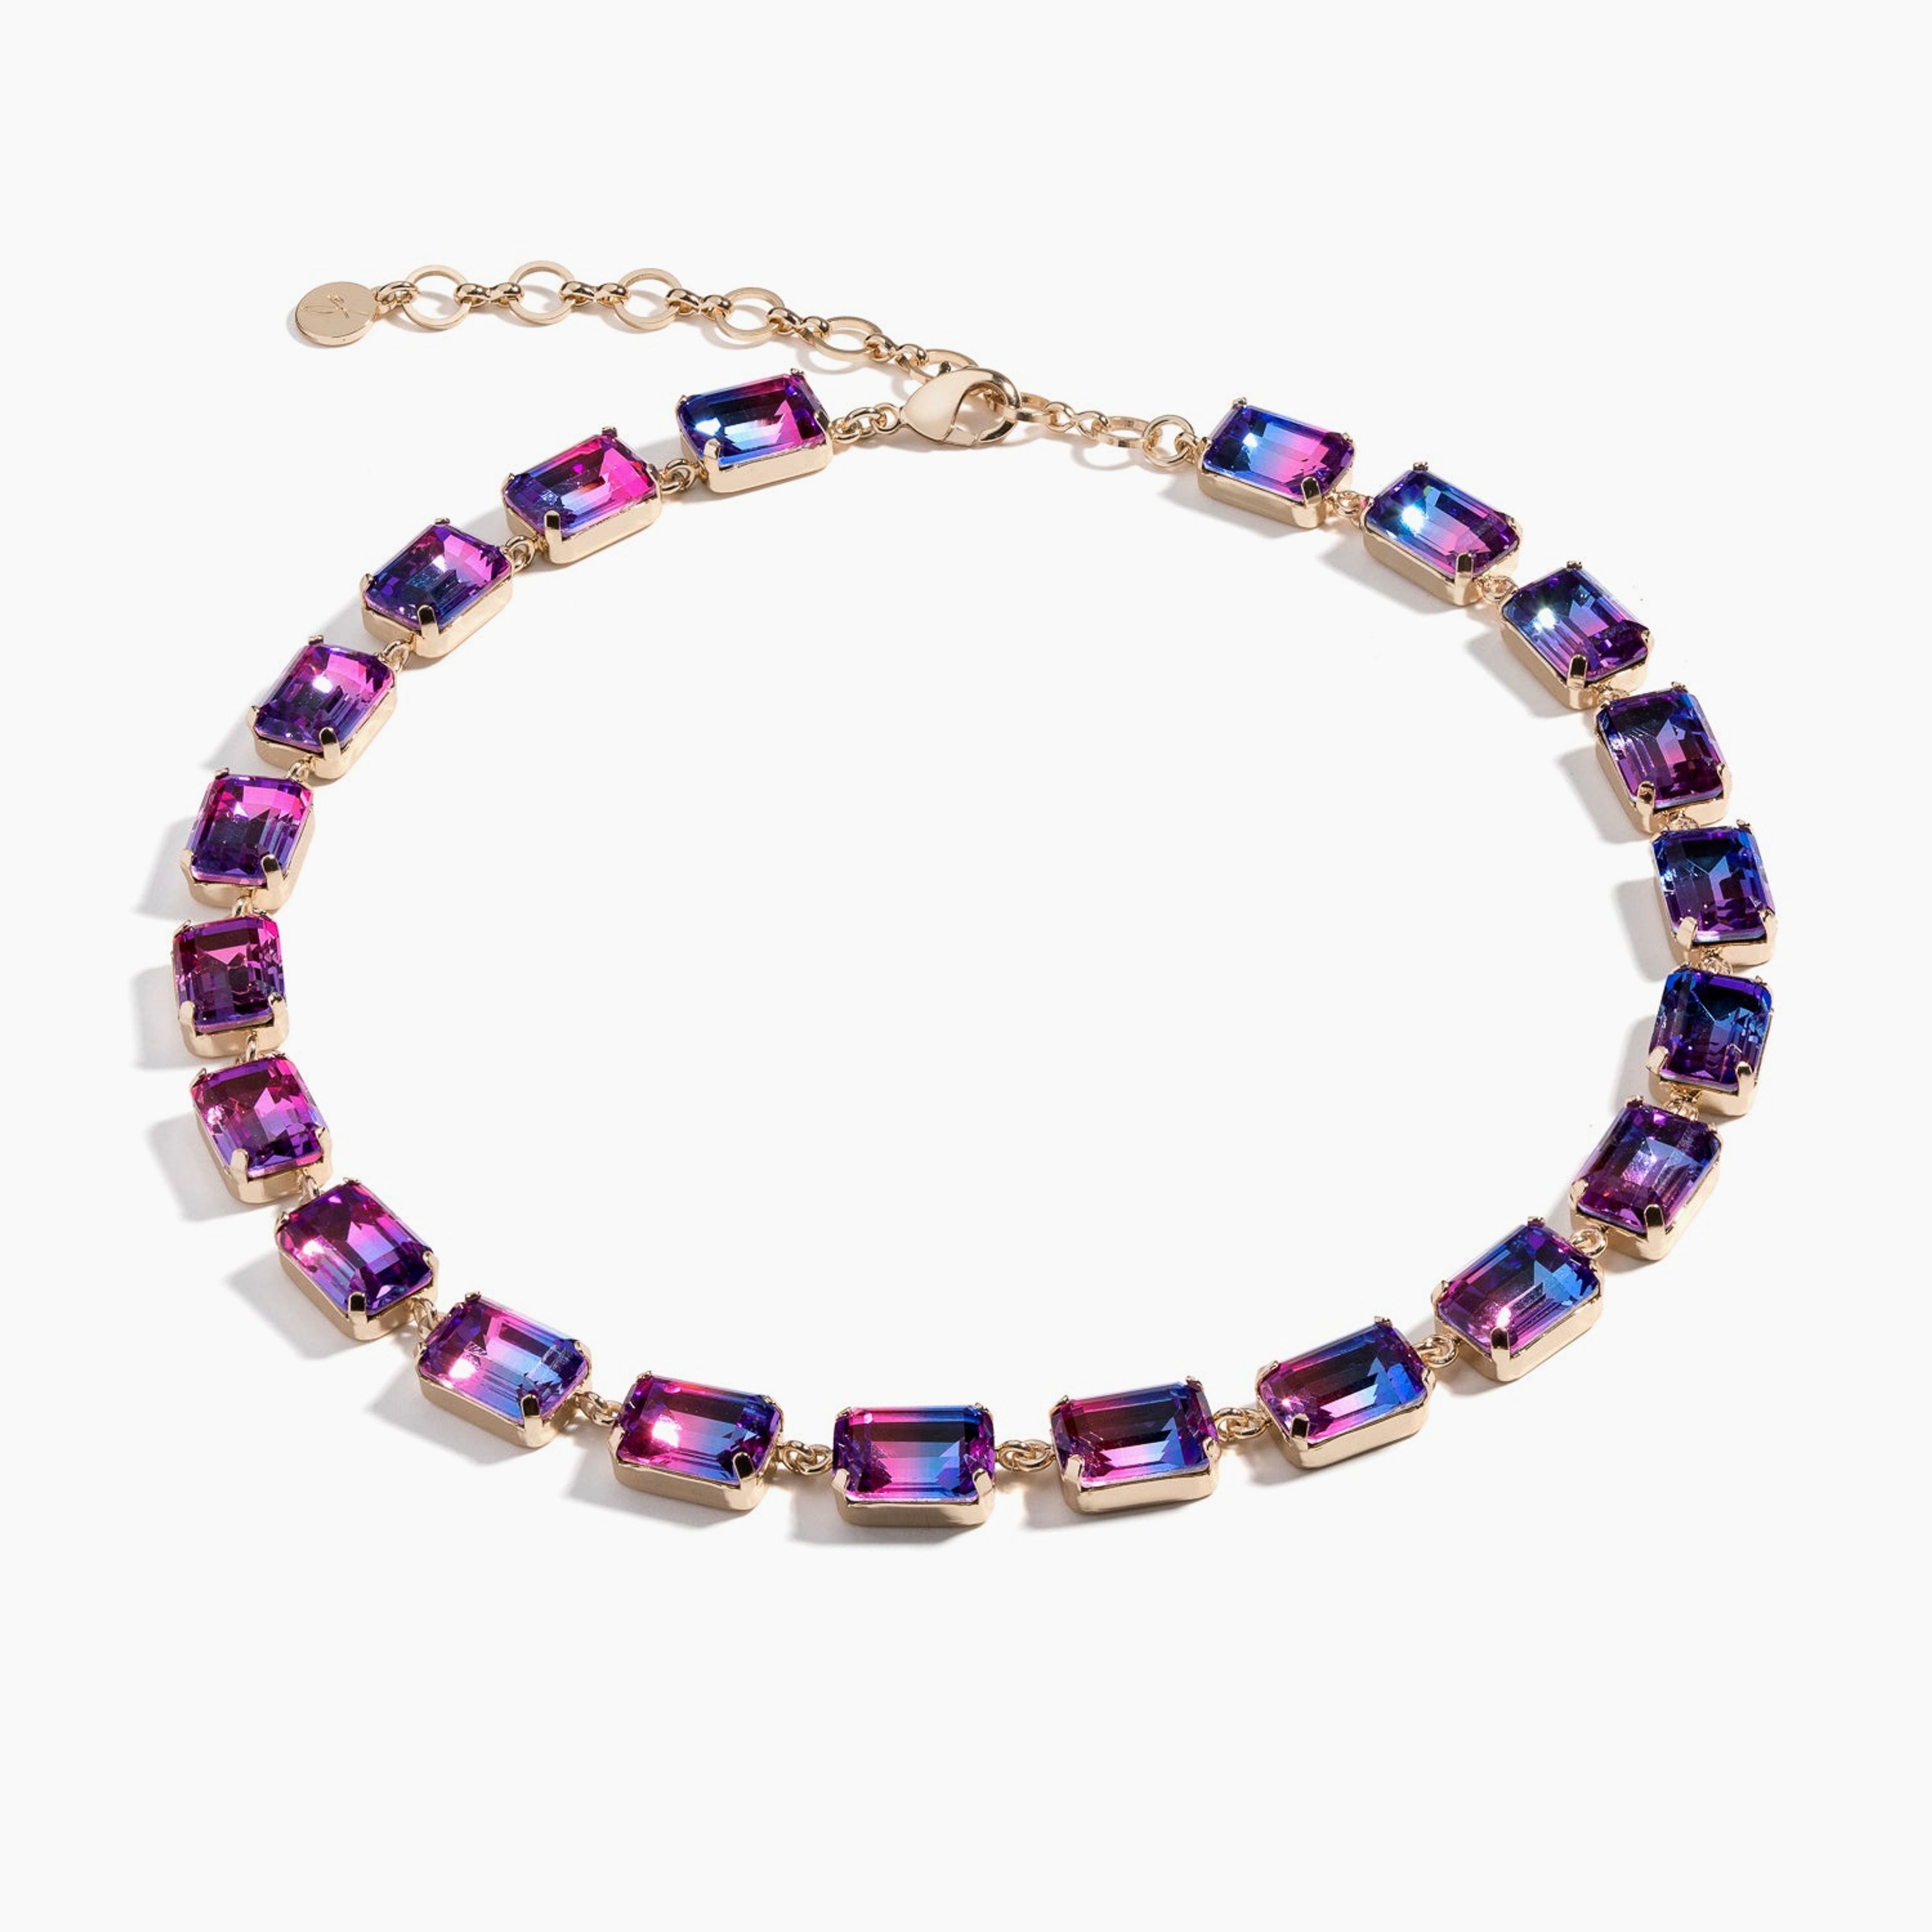 Marry Up Necklace | Ombre